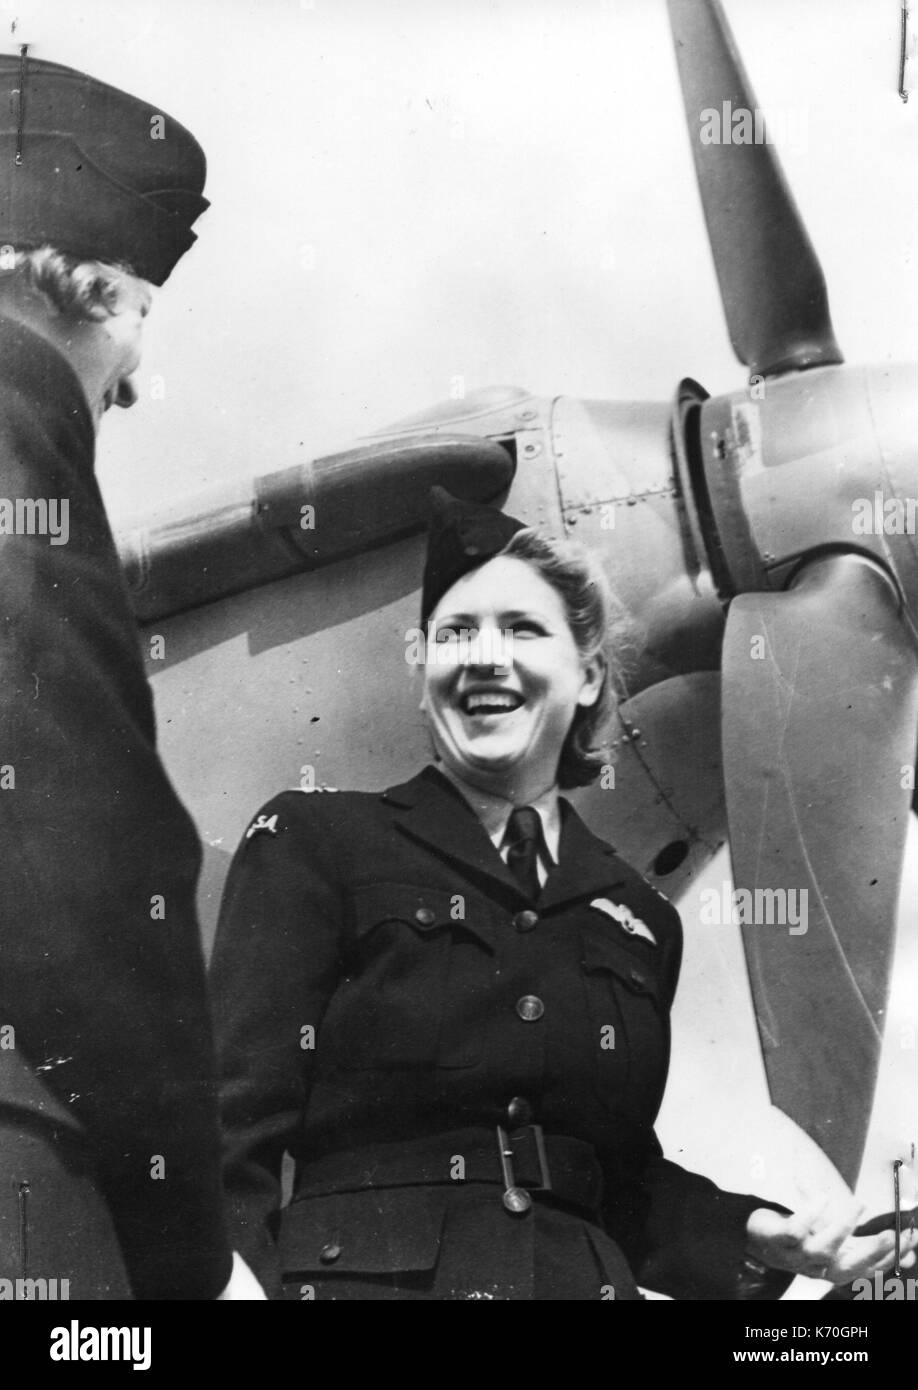 AMERICAN WOMEN WHO FLY WARSHIPS TO THE MEN WHO FLY THEM AGAINST AXIS -- Leader of the U.S. group, Flight Captain Jacqueline Cochran, holder of numerous U.S. and international speed and altitude records. June 13, 1942. Stock Photo